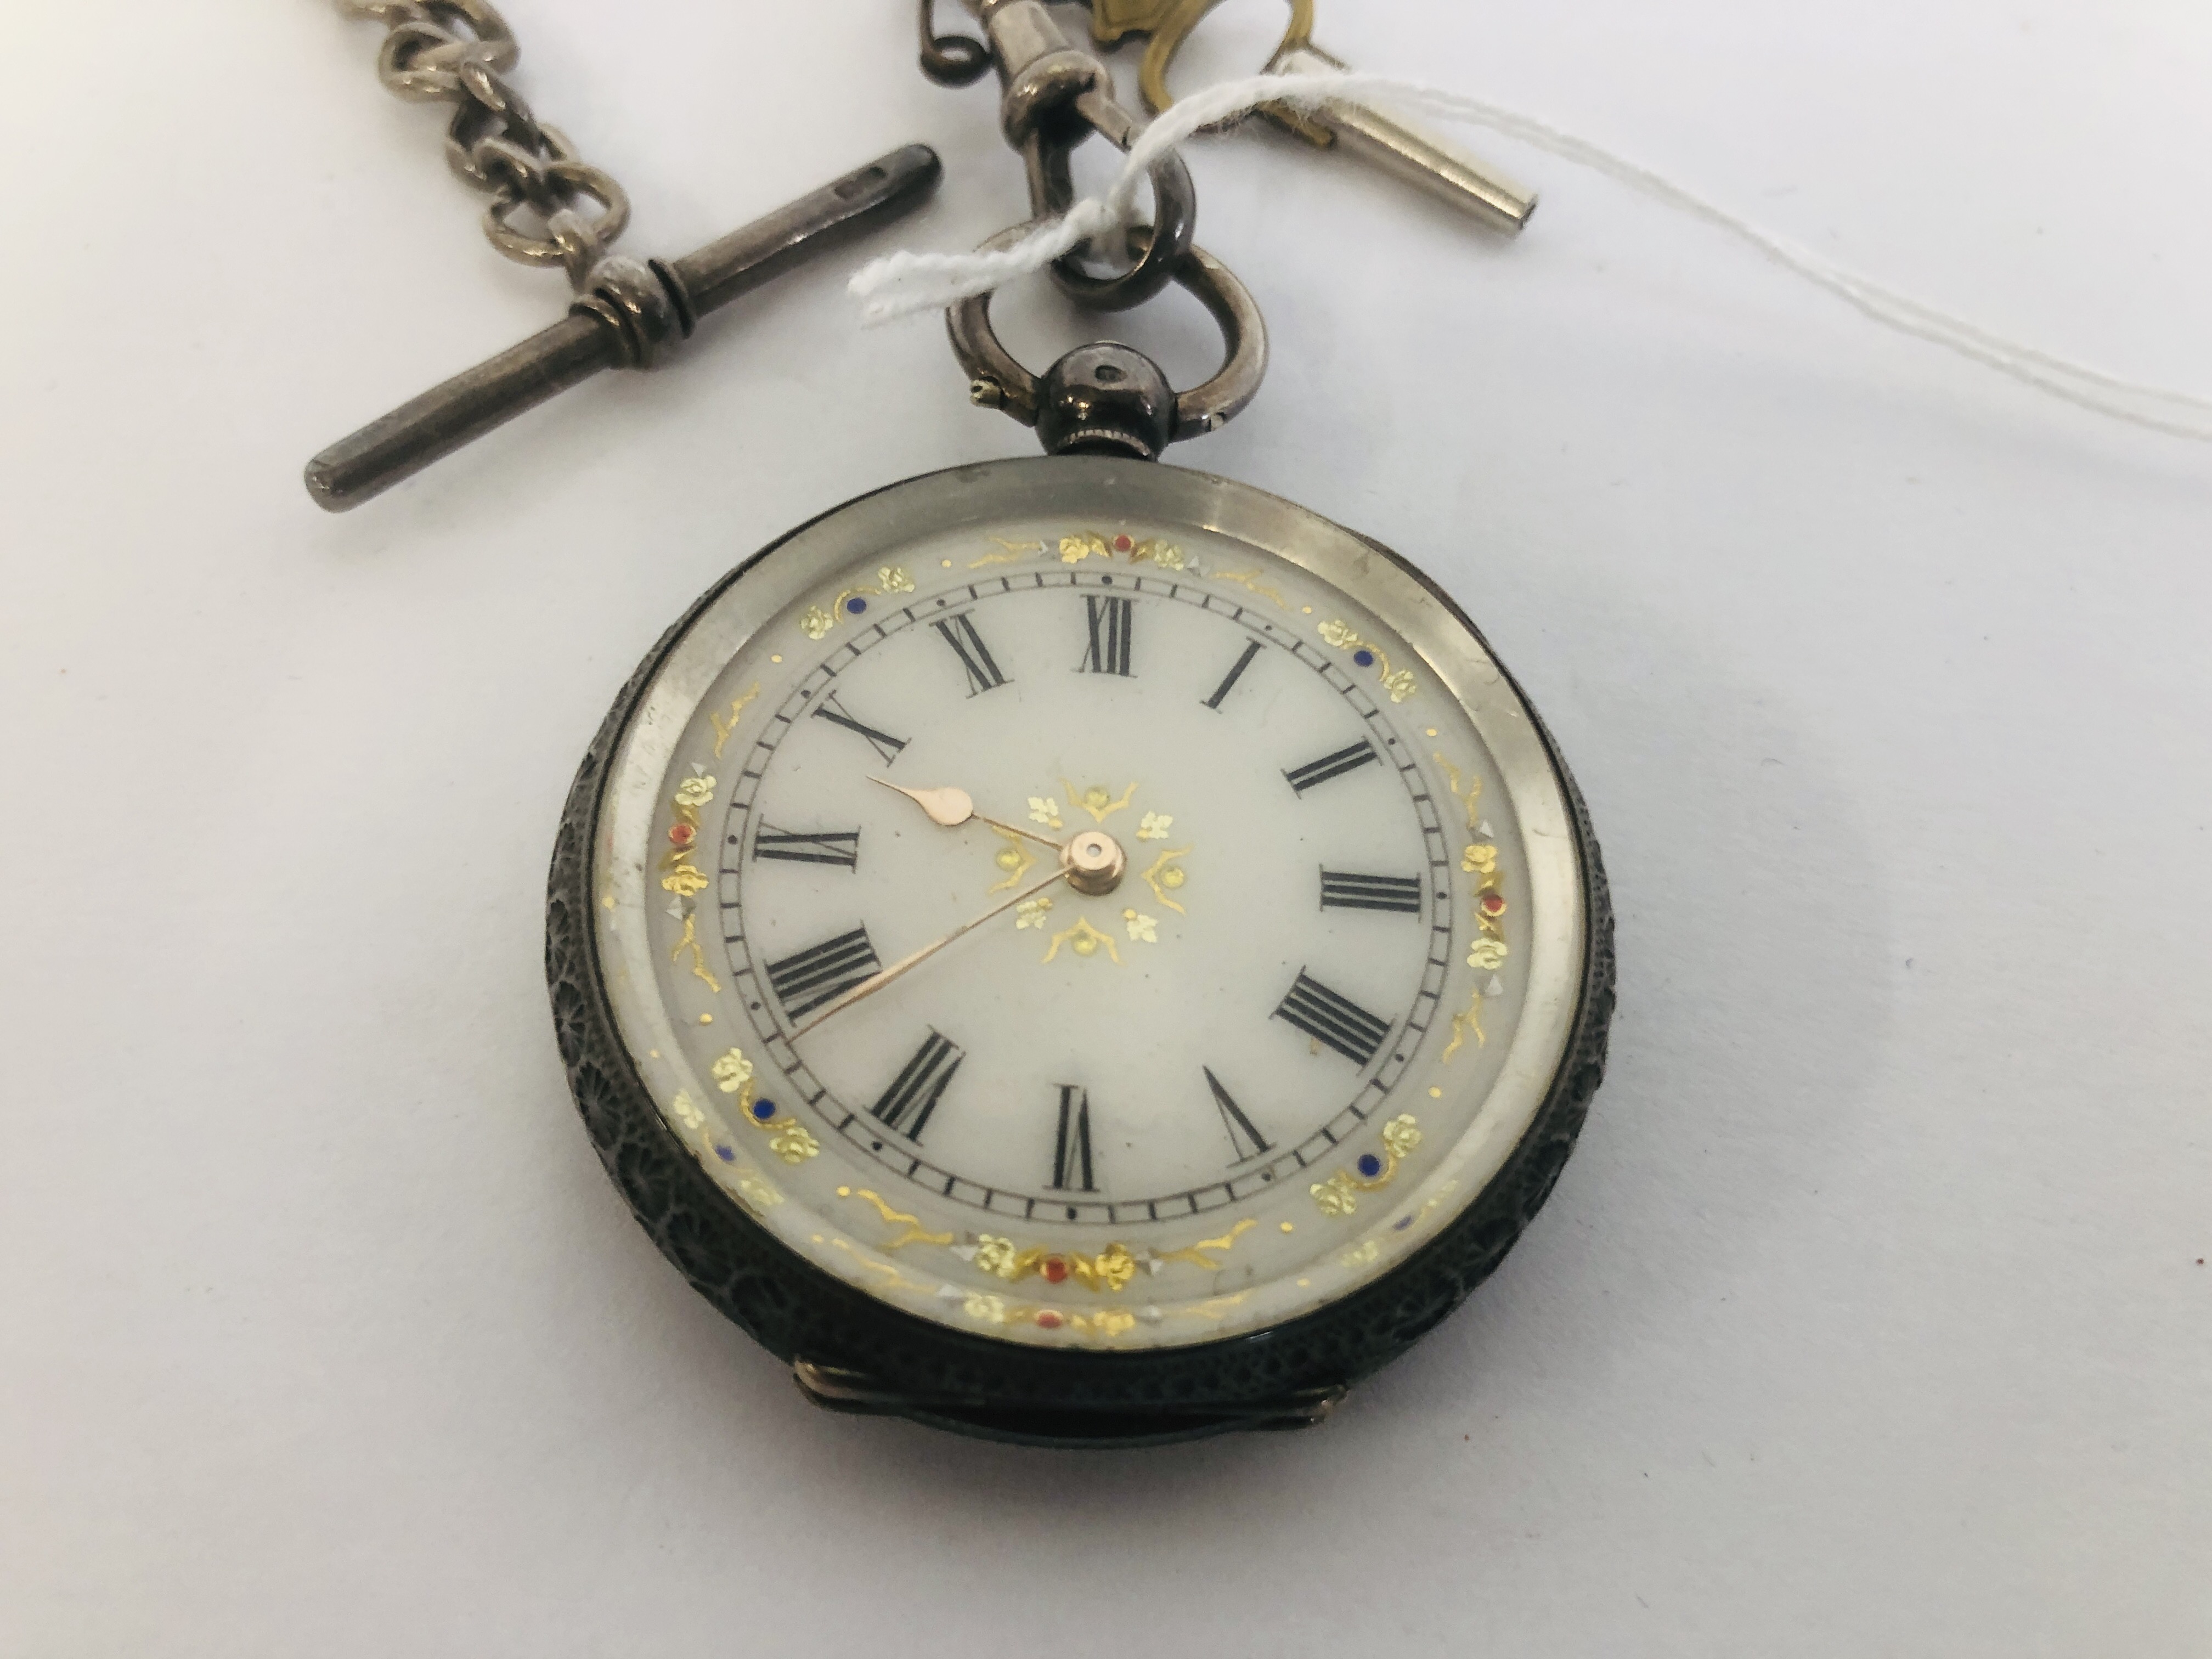 AN ORNATE SILVER POCKET WATCH WITH DECORATIVE ENAMELLED FACE ON SILVER T-BAR CHAIN - Image 2 of 6